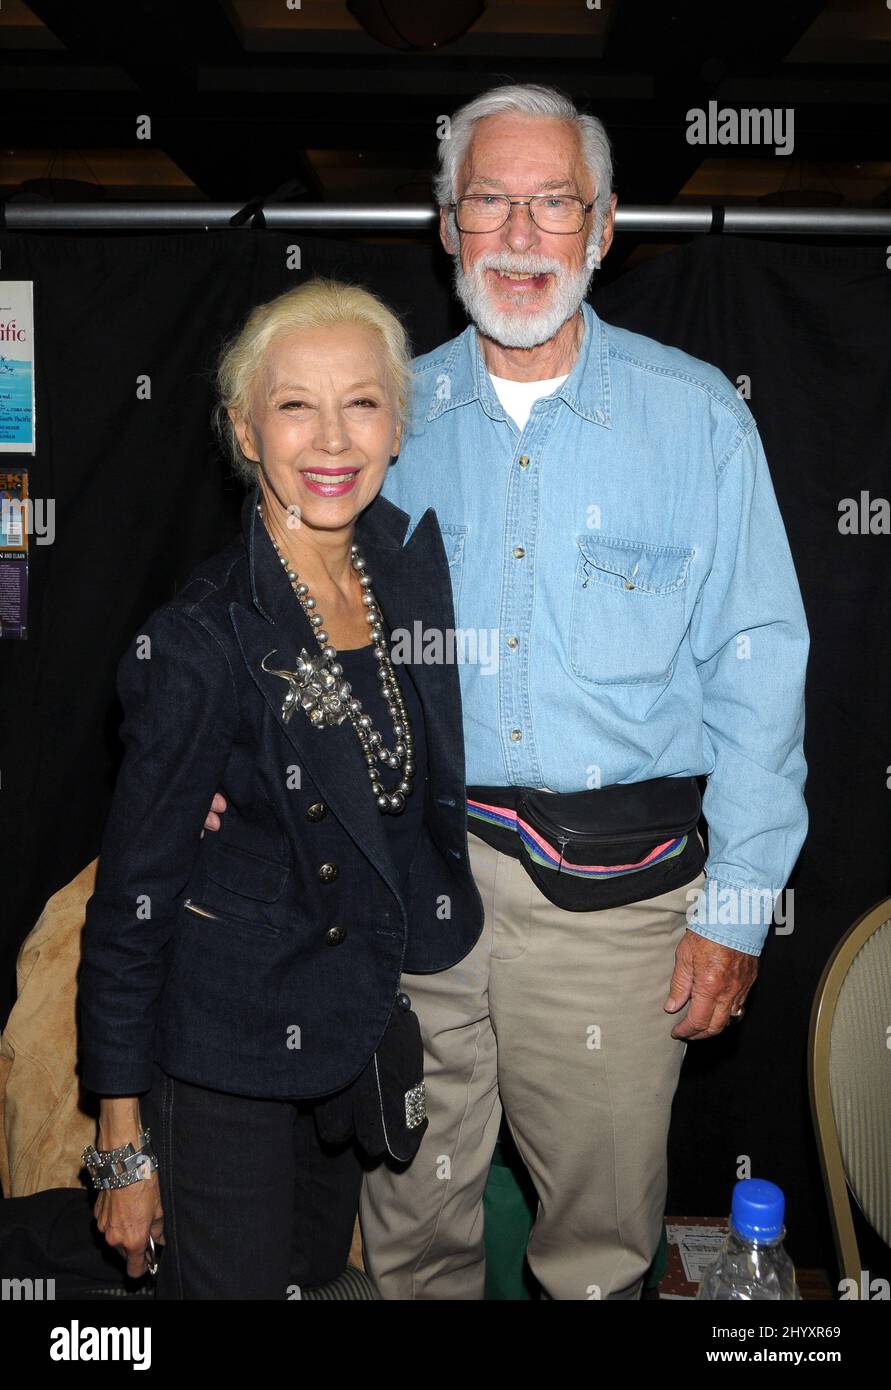 France Nuyen and John Kerr at the "The Hollywood Show" Fall 2010 held at the Burbank Airport Marriott Hotel & Convention Center, Burbank, California Stock Photo